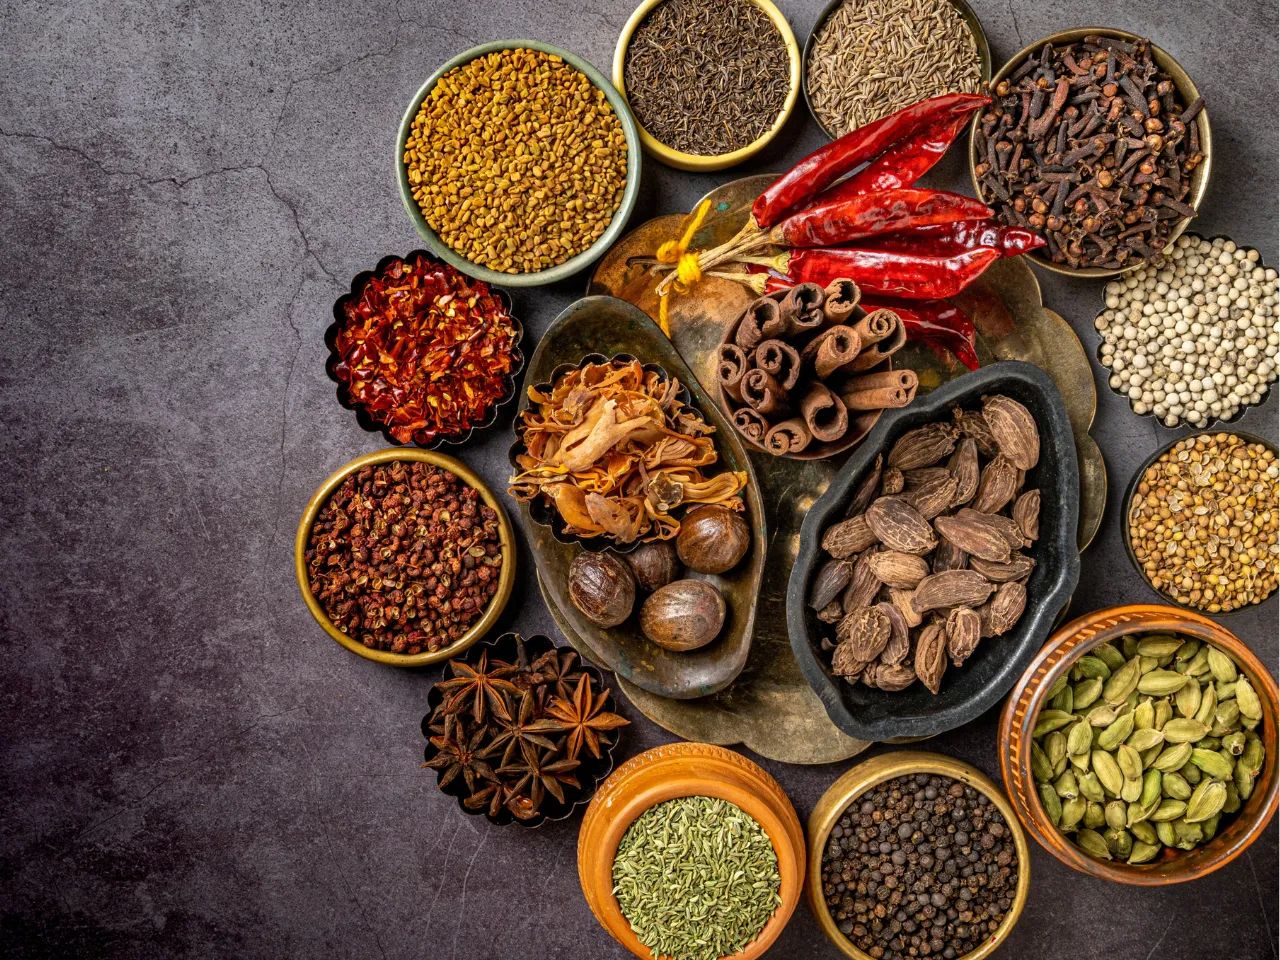 Indian Masala brands you might want to consider for alternatives!